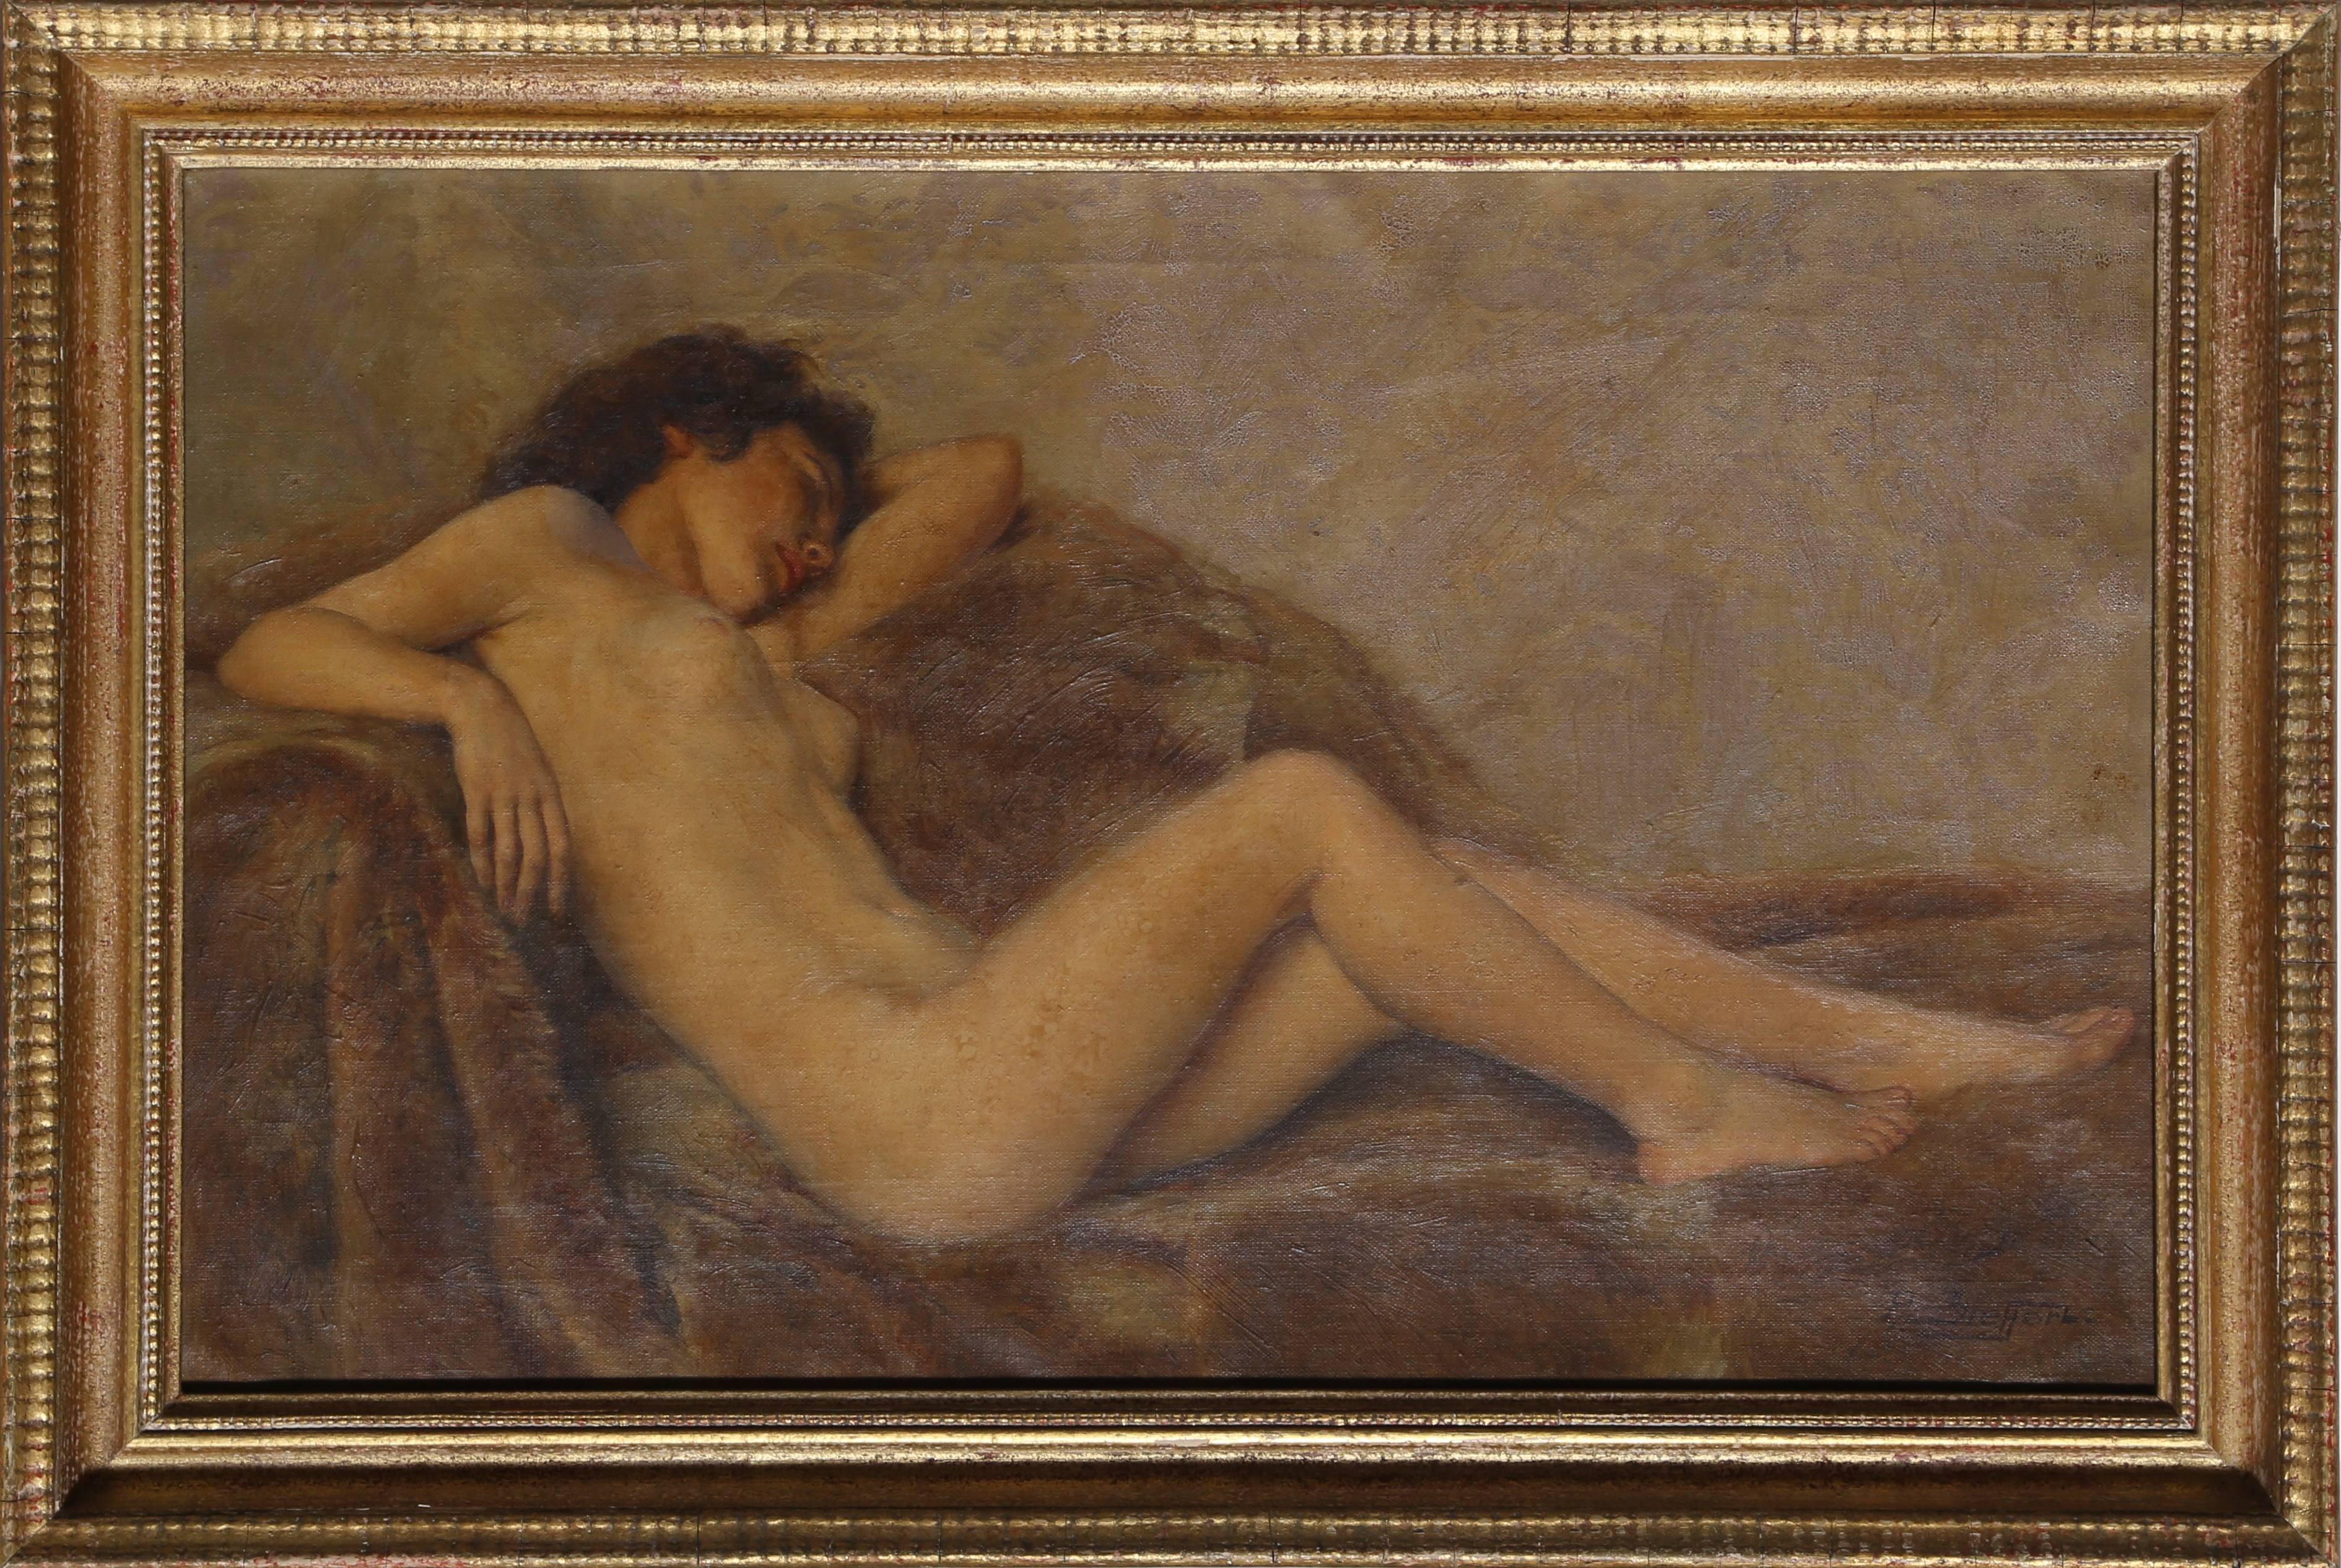 Artist: Paul Sieffert, French (1874 - 1957)
Title: Reclining Nude
Year: circa 1940
Medium: Oil on Canvas, signed l.r.
Size: 15 x 24 in. (38.1 x 60.96 cm)
Frame Size: 18.5 x 27.5 inches